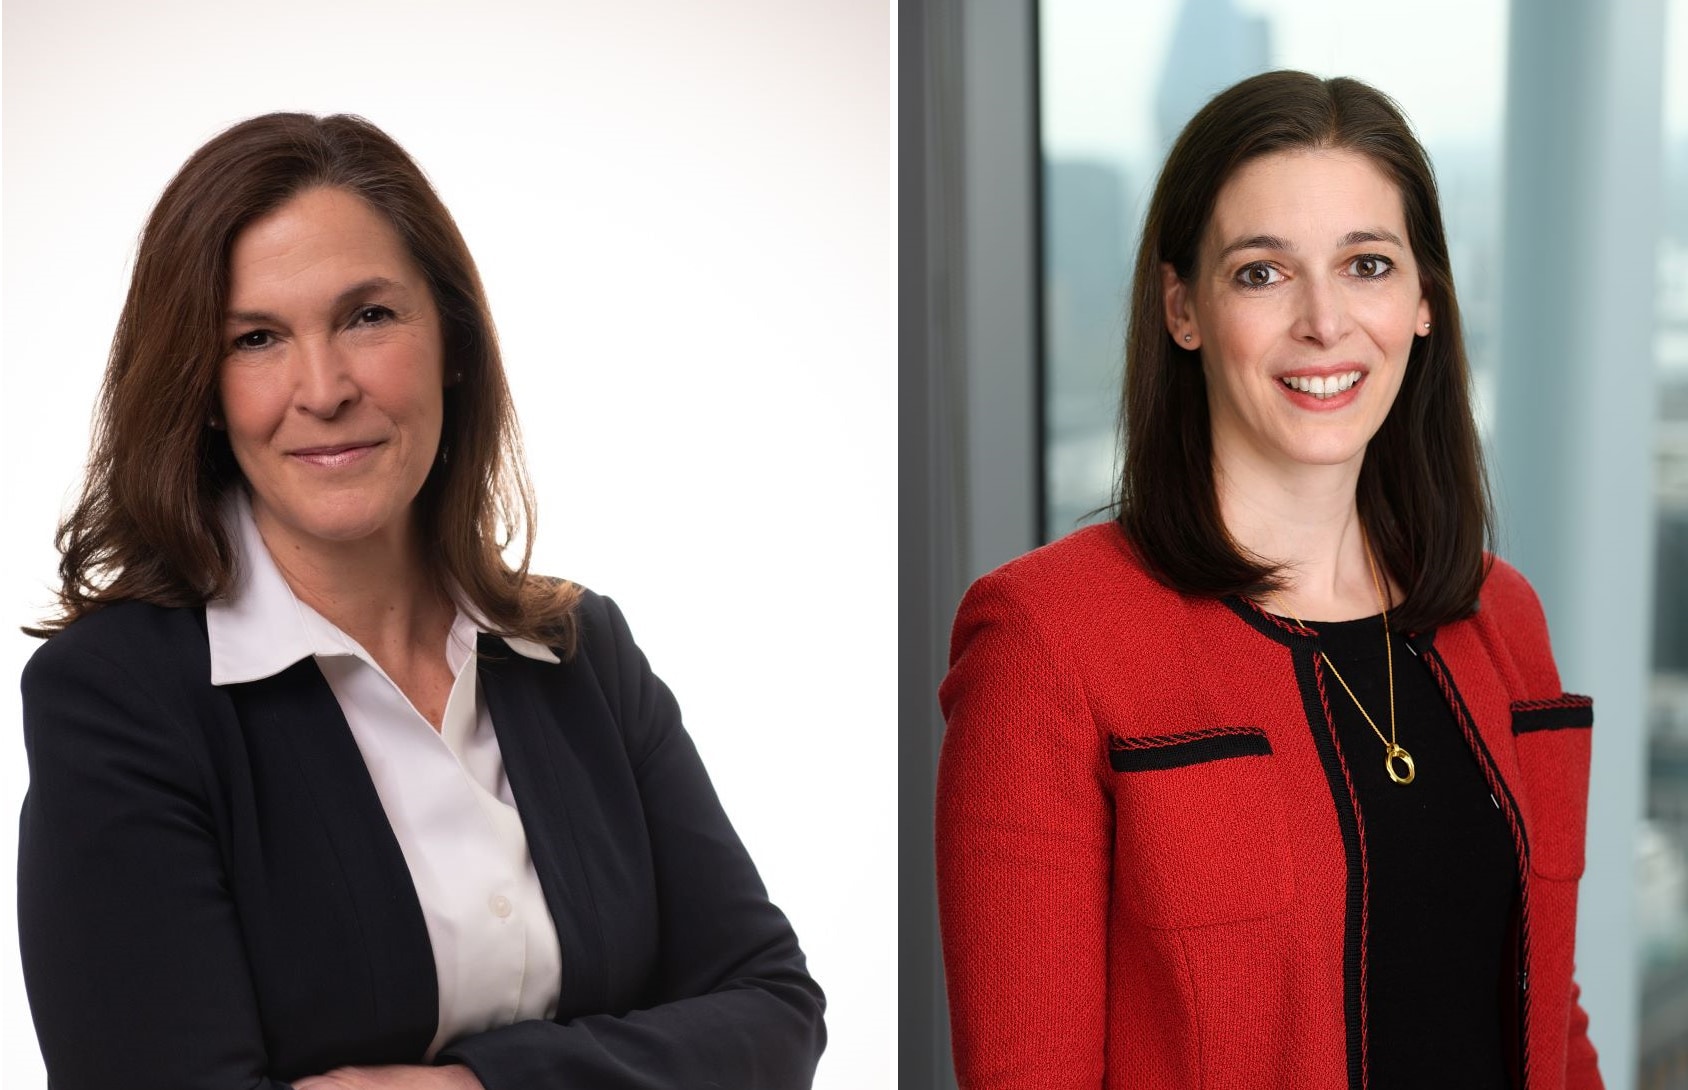 Liberty Mutual Global Risk Solutions Chief Risk Officer Crystal Ottaviano and Liberty Mutual Reinsurance Chief Underwriting Officer Chantal Rodriguez